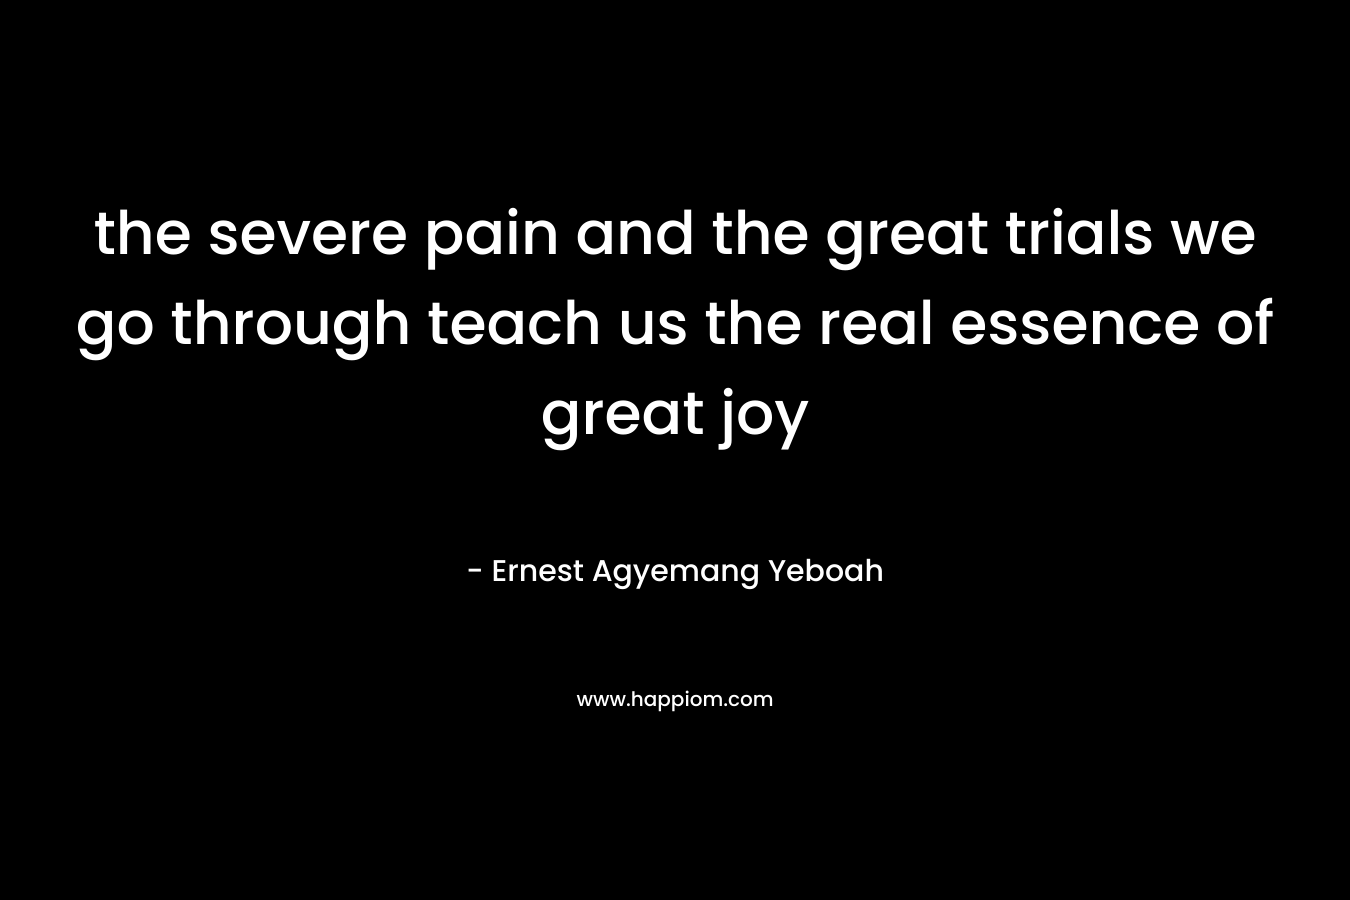 the severe pain and the great trials we go through teach us the real essence of great joy